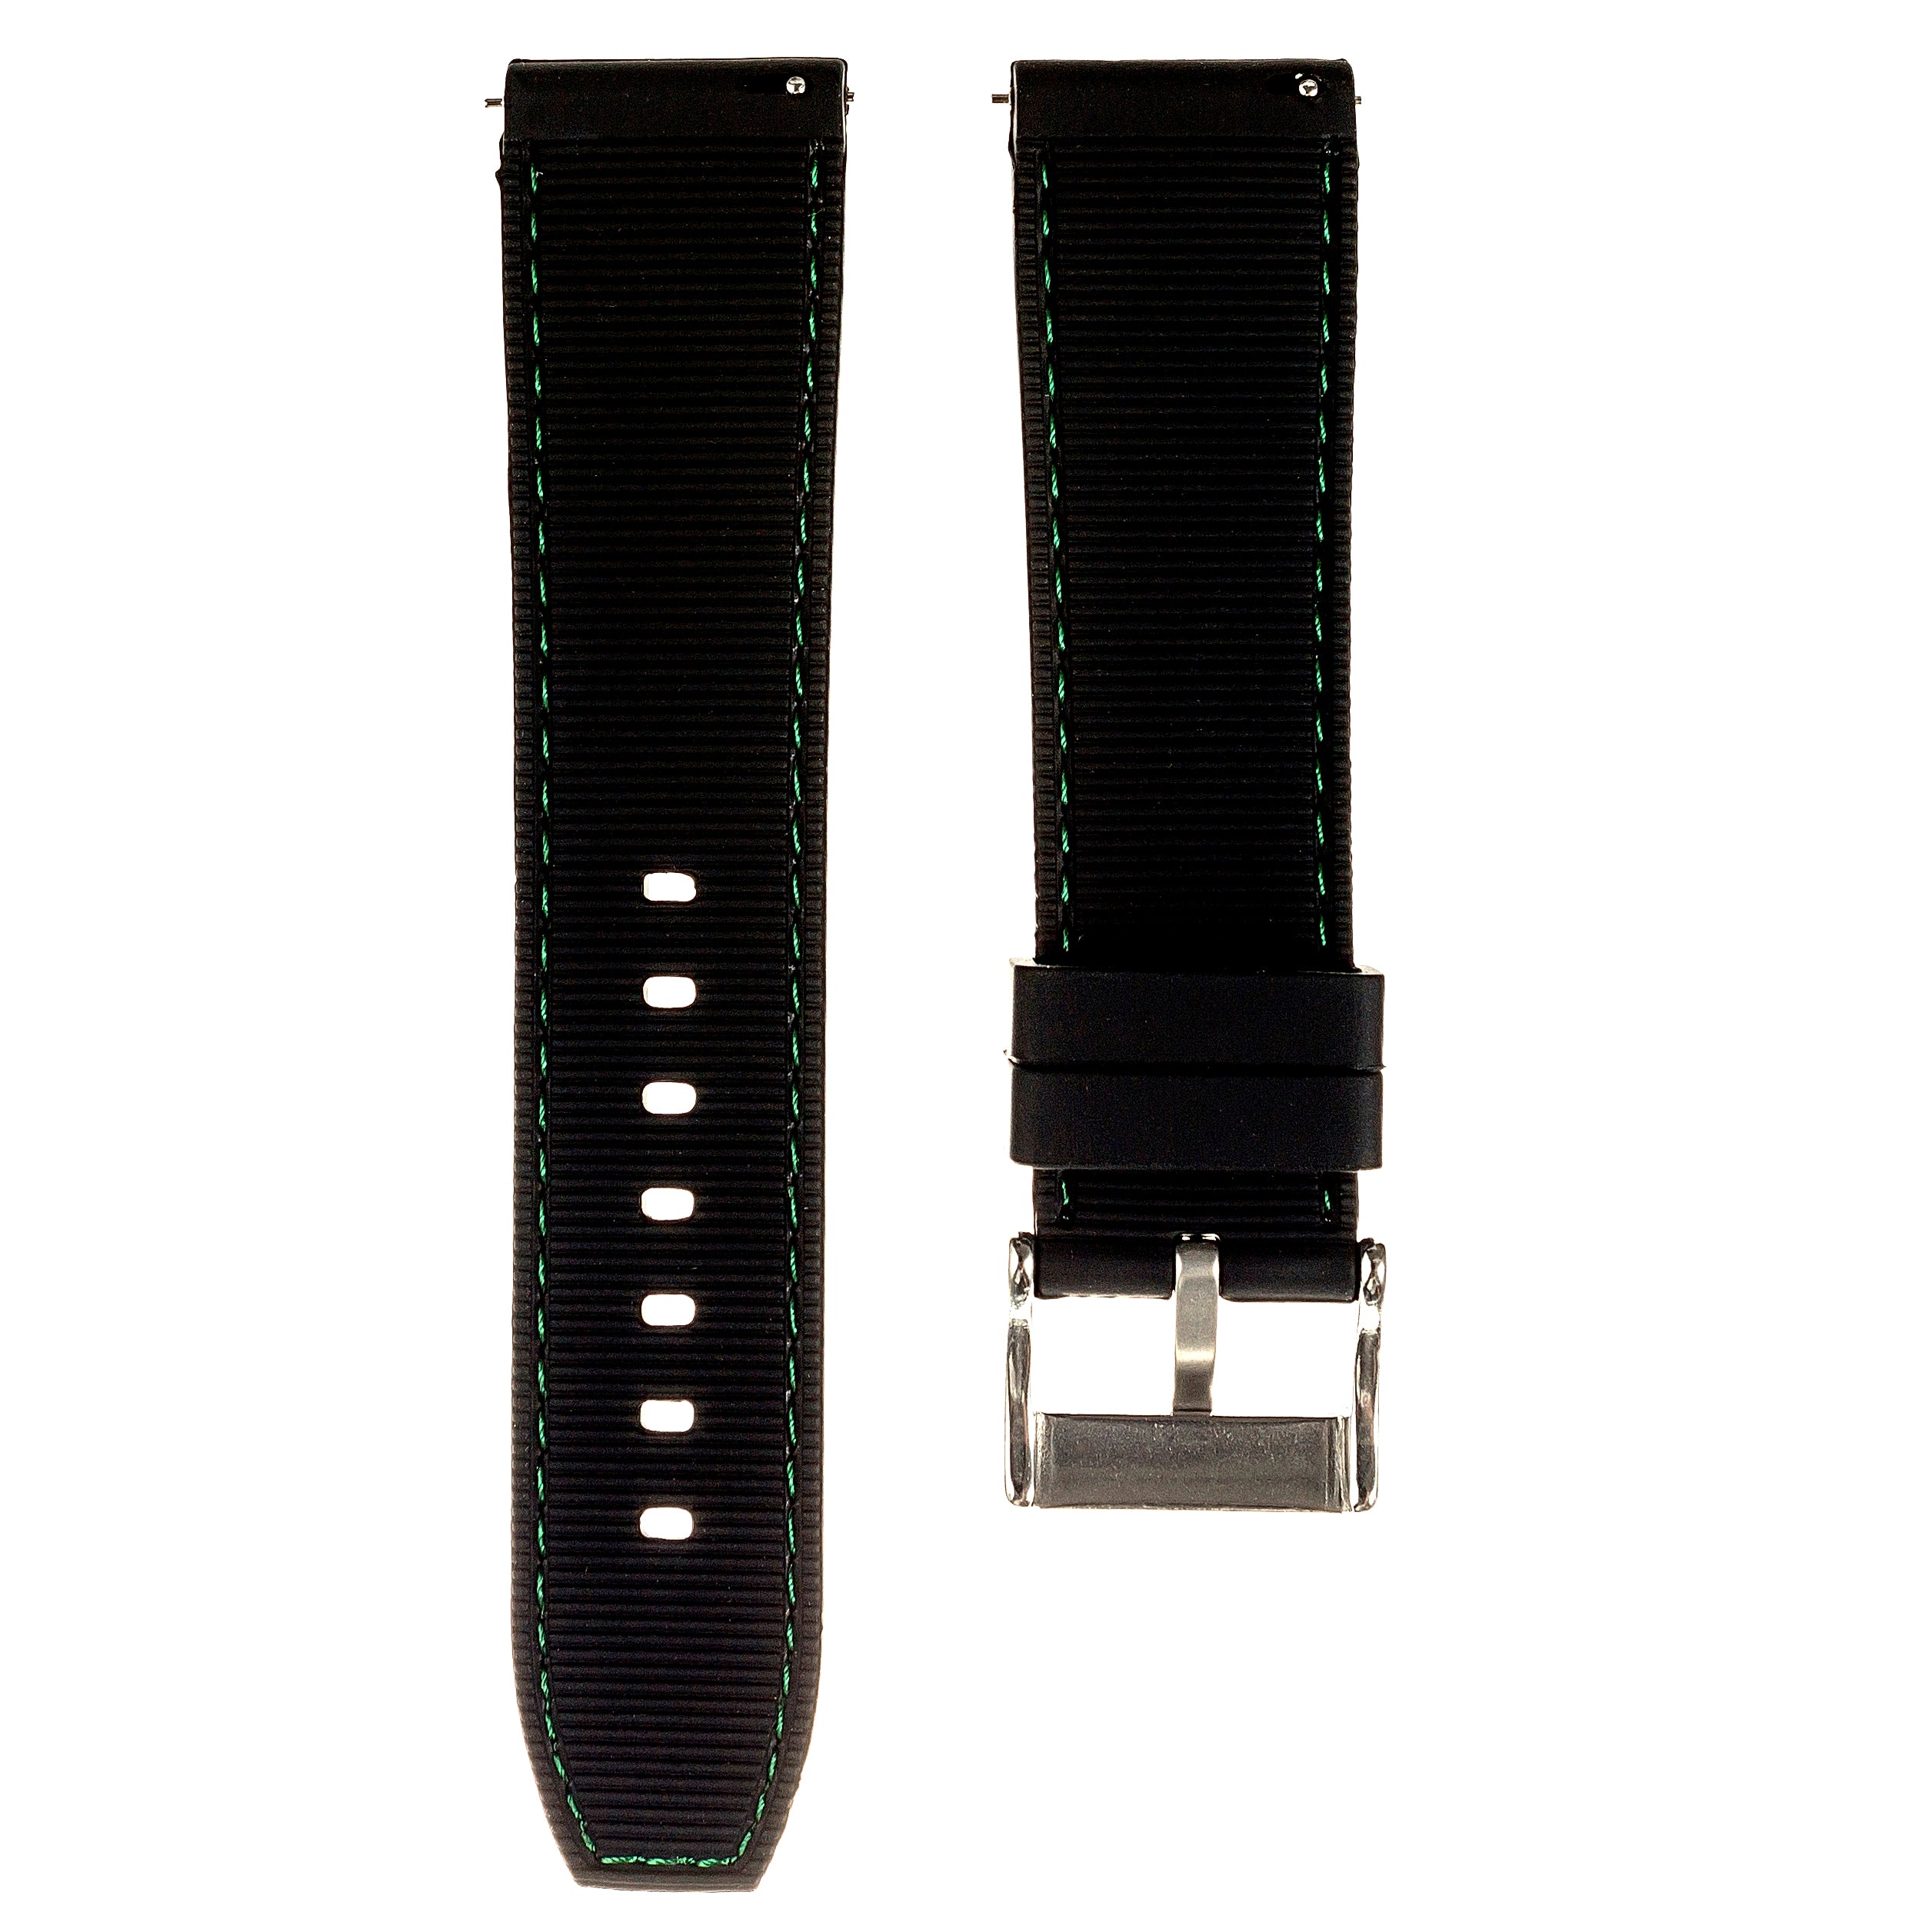 Perforated Stitch Soft Silicone Strap - Quick-Release - Black with Green Stitch (2401)